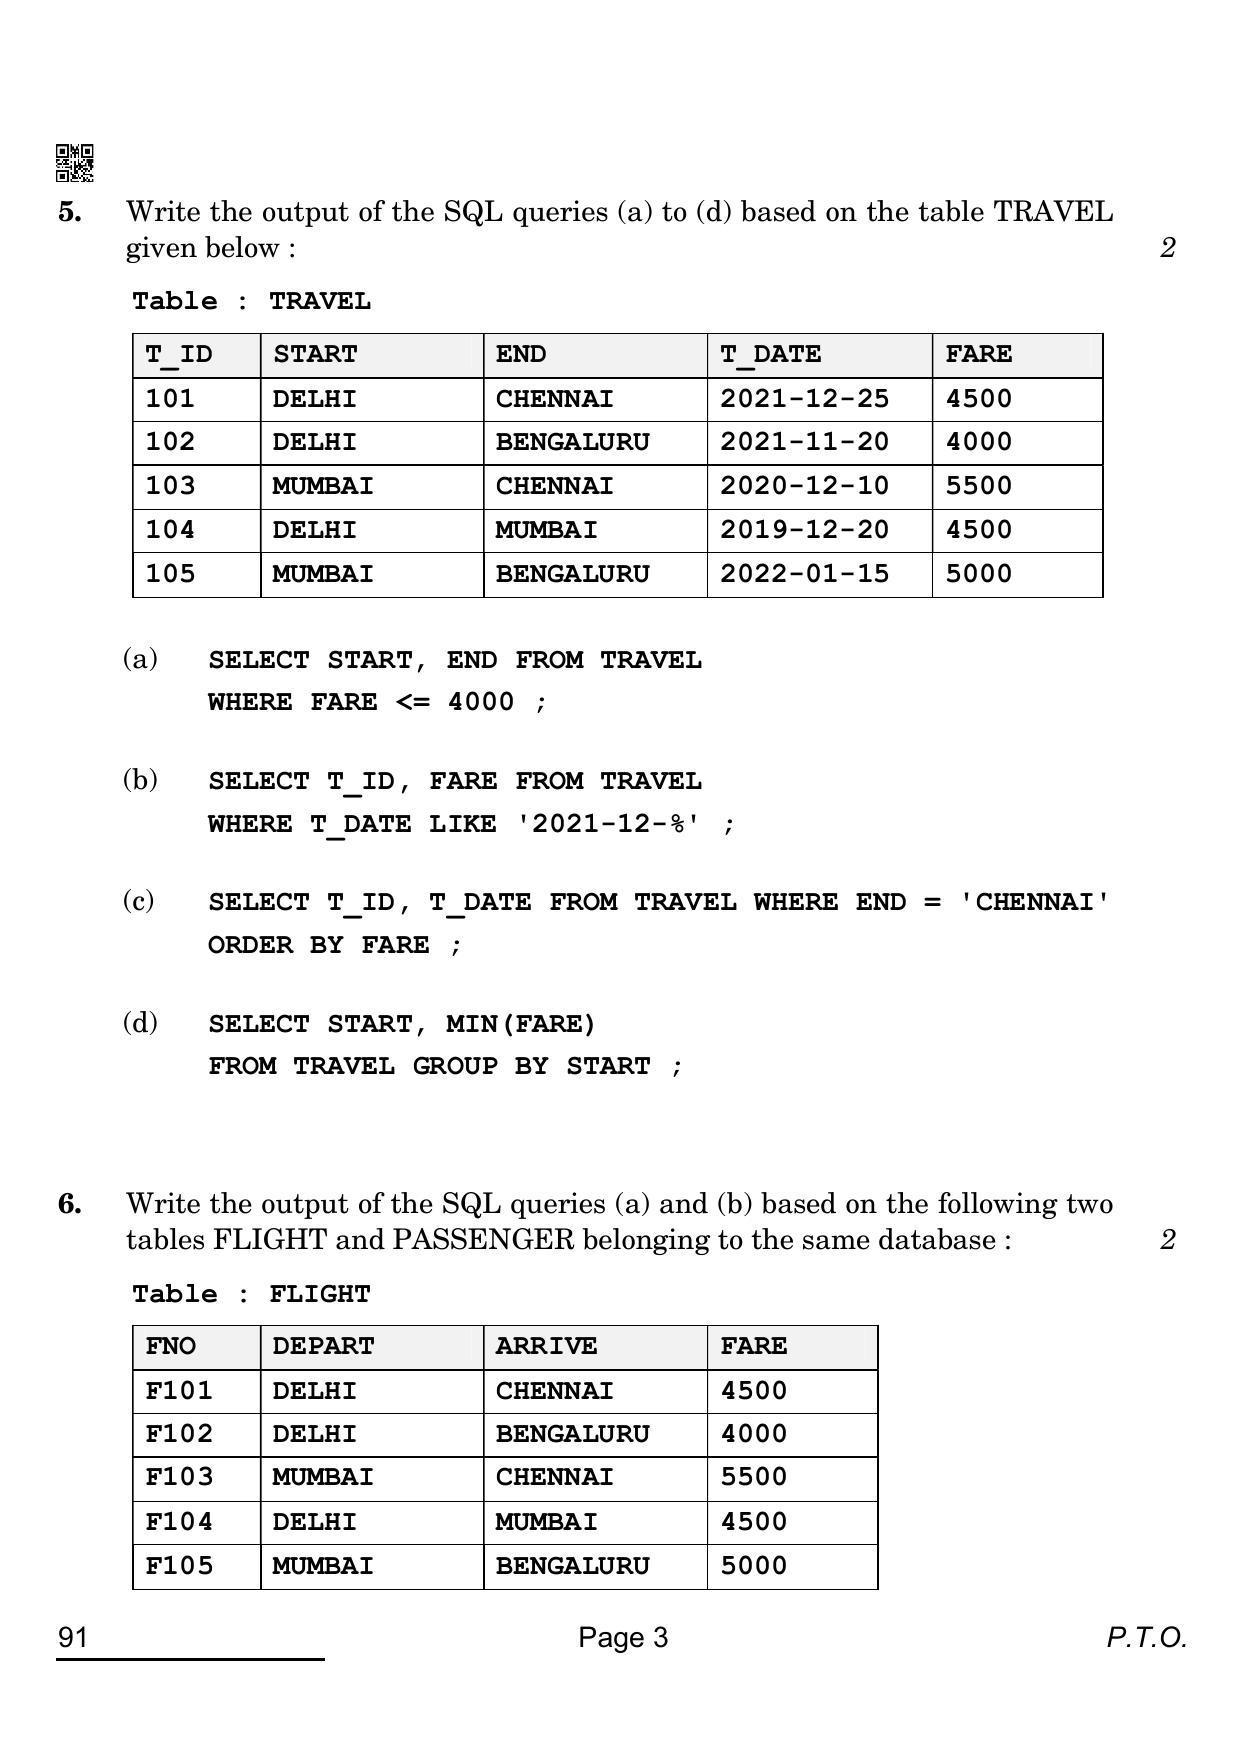 CBSE Class 12 91 Computer Science 2022 Compartment Question Paper - Page 3